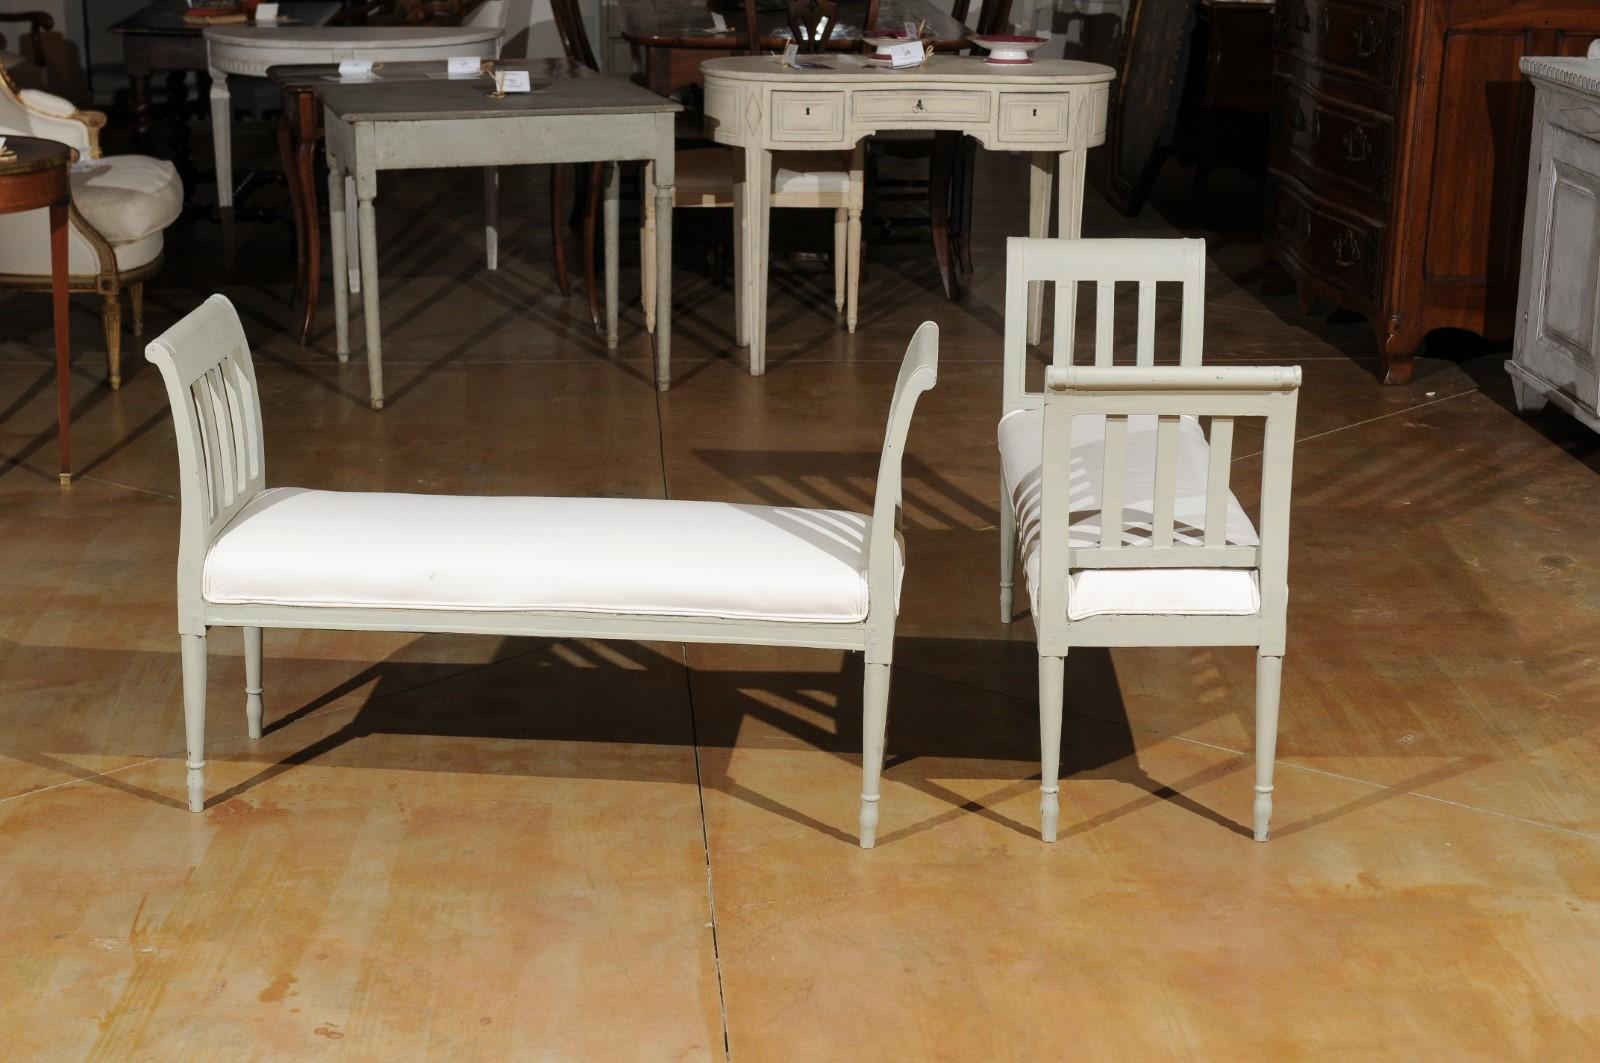 Italian 1890s Painted Wood Classical Bench with Scrolling Arms and Upholstery For Sale 3